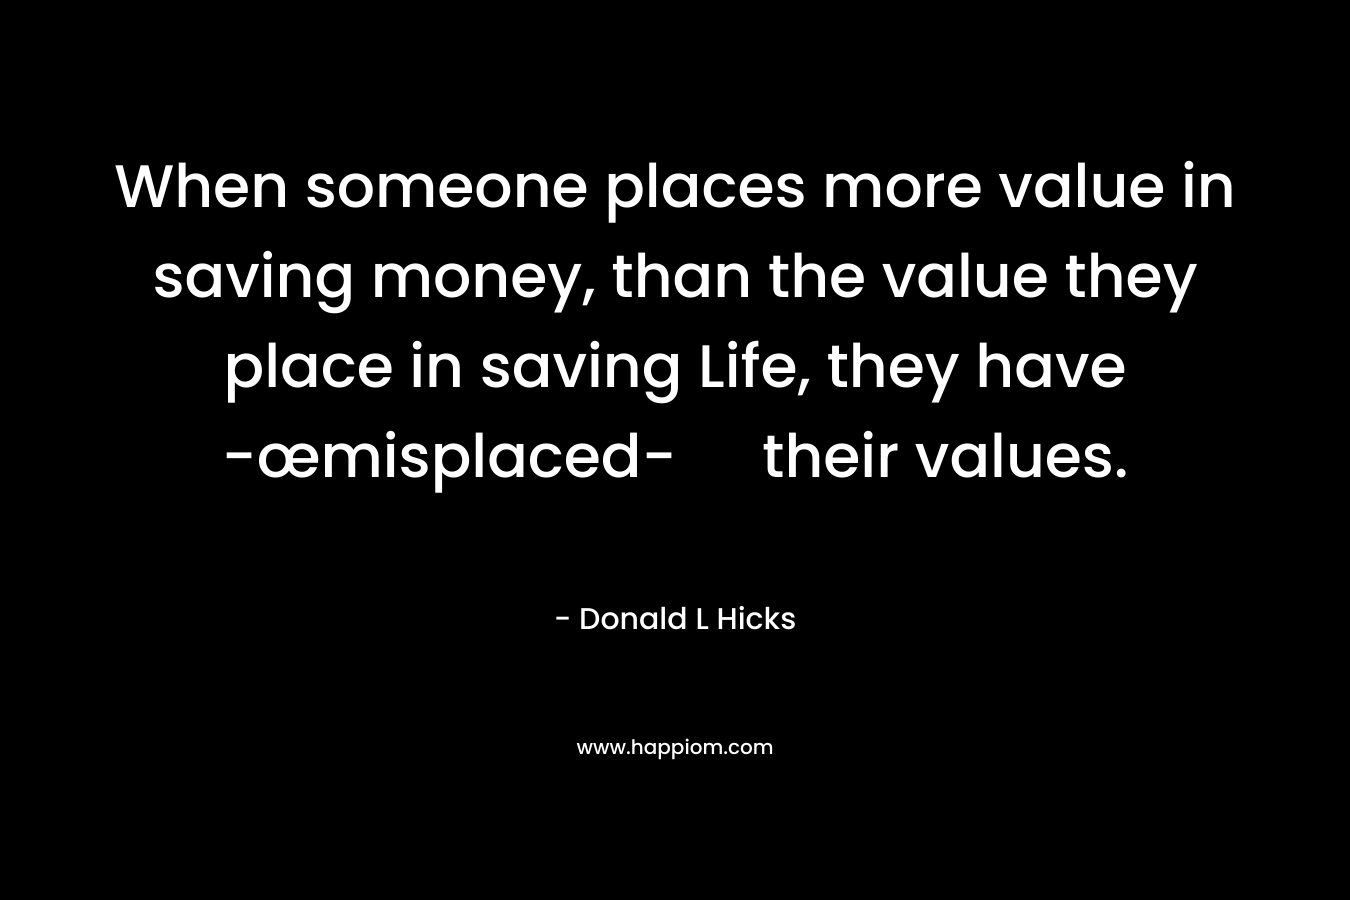 When someone places more value in saving money, than the value they place in saving Life, they have -œmisplaced- their values.